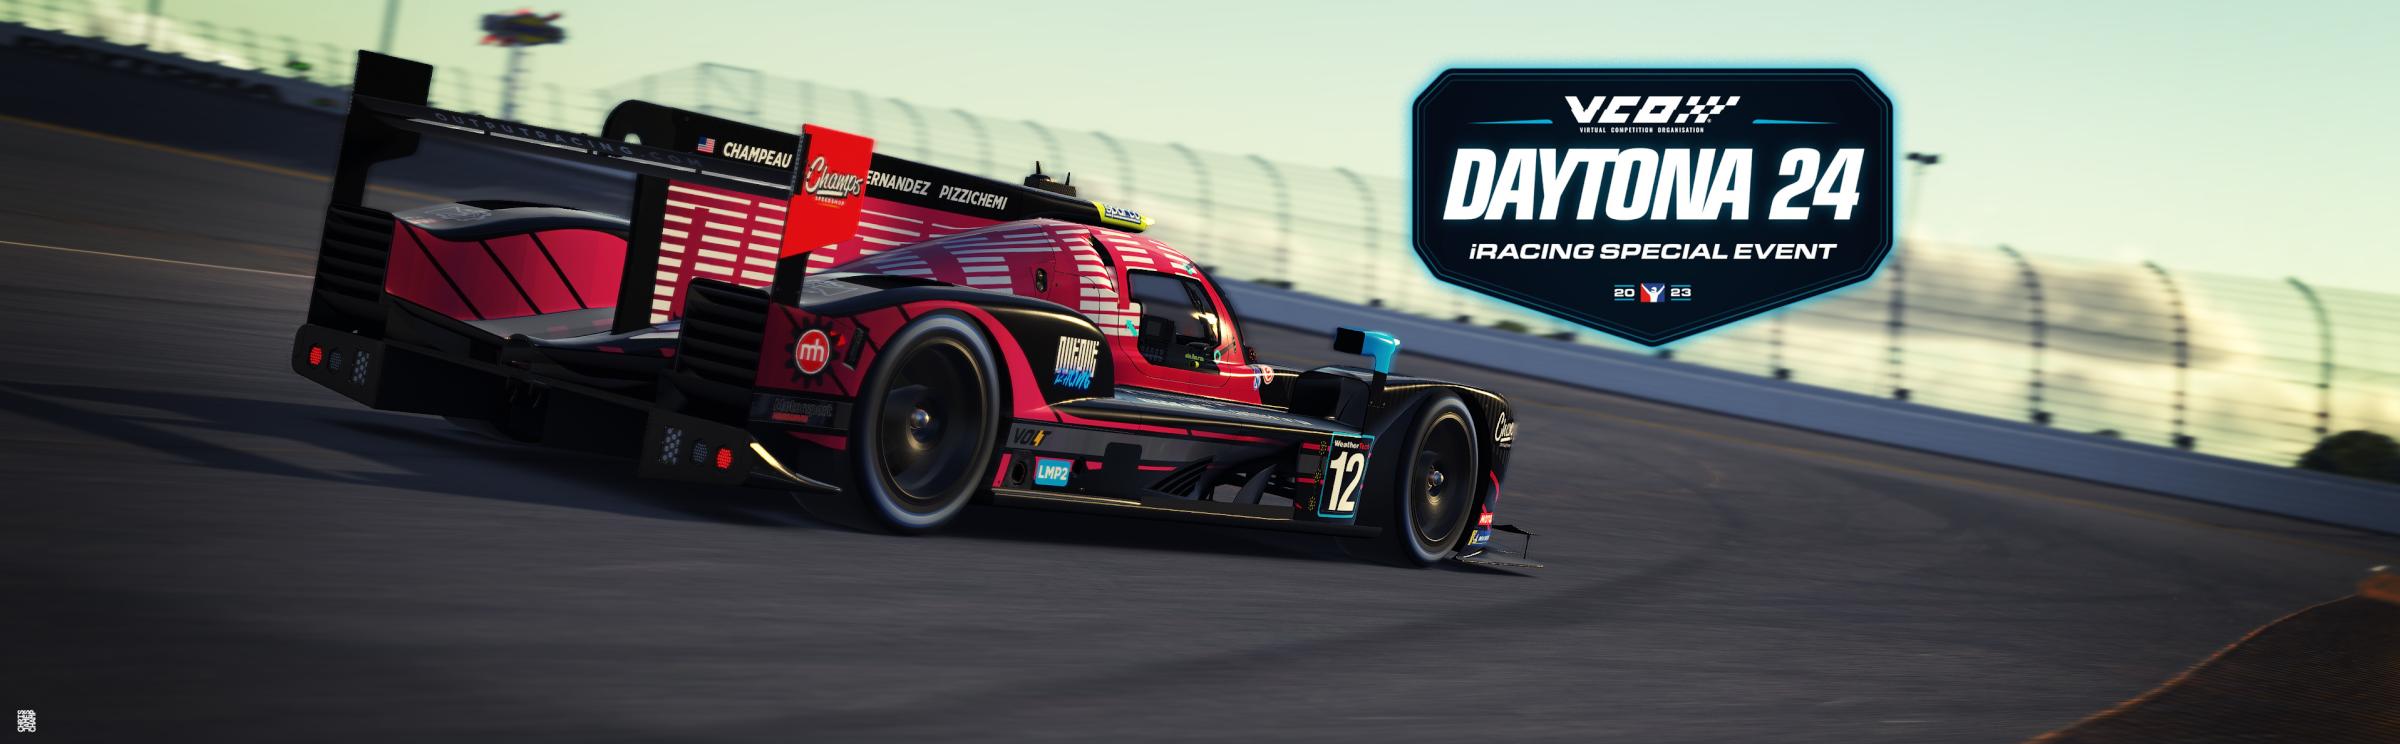 Preview of Output Racing 2023 24Hrs at Daytona LMP2 by Chris Champeau